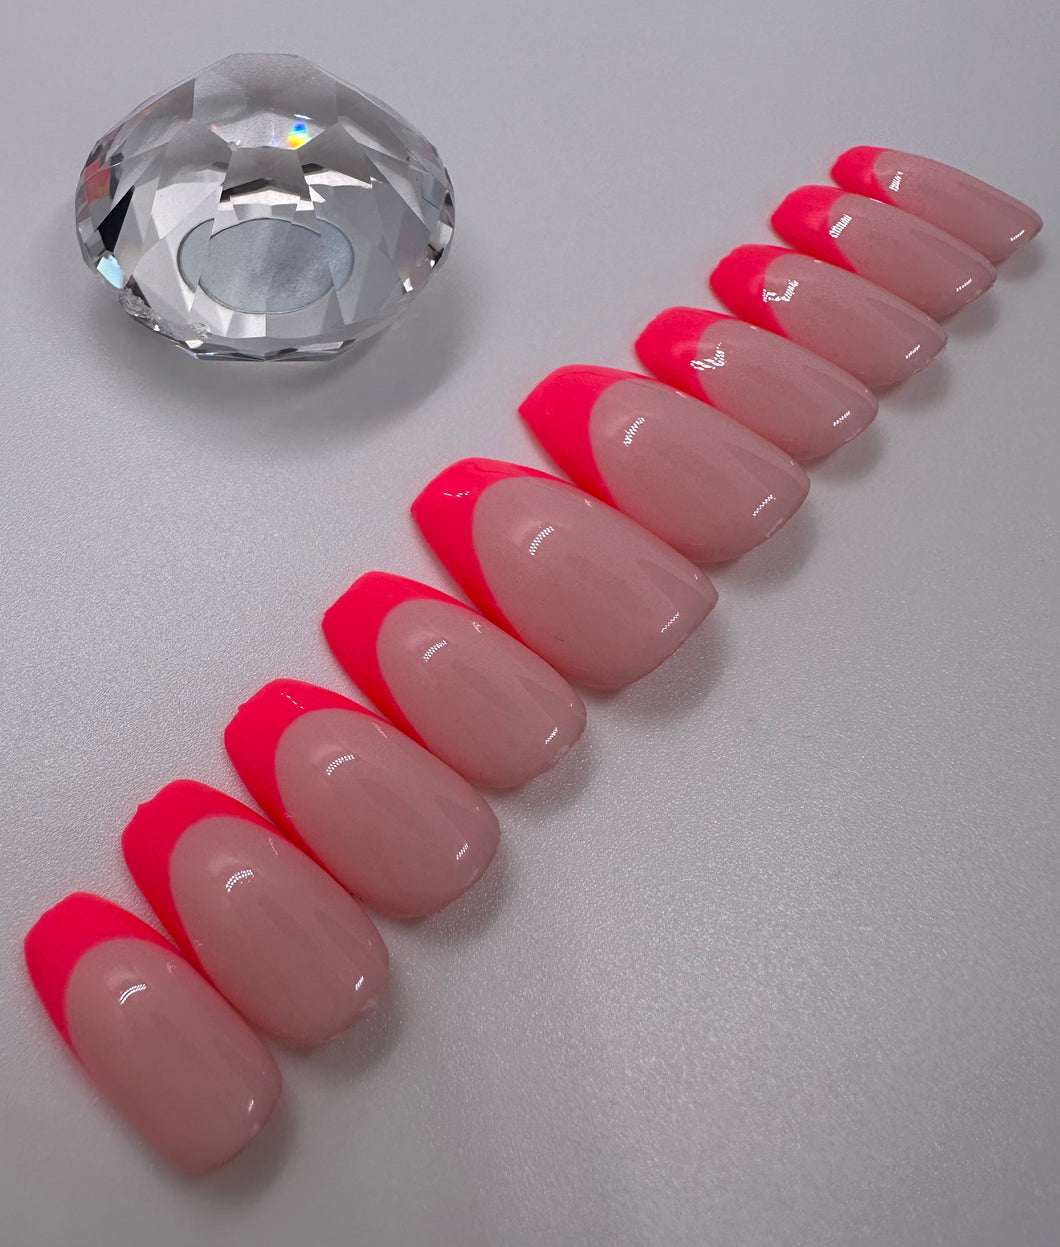 Neon Pink French Tips